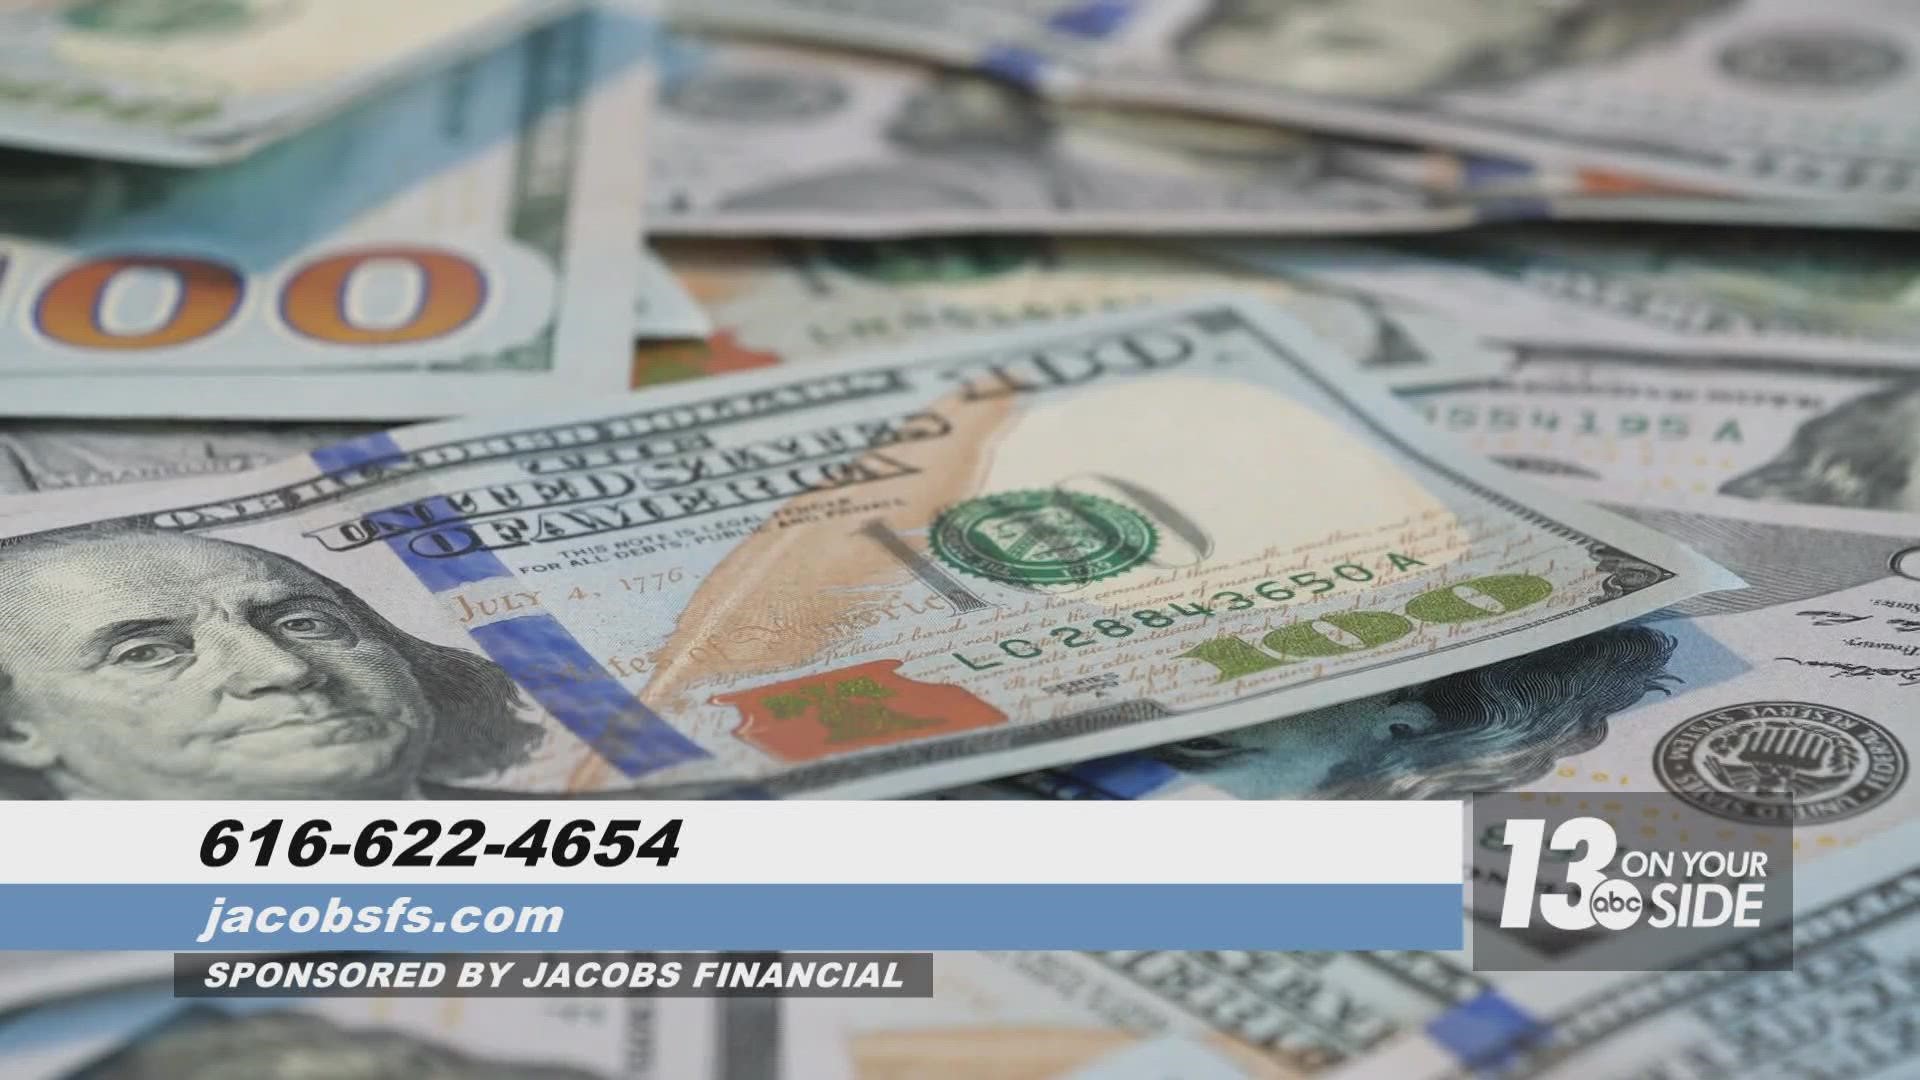 Tom Jacobs from Jacobs Financial Services has helped thousands of people create a rock-solid plan.